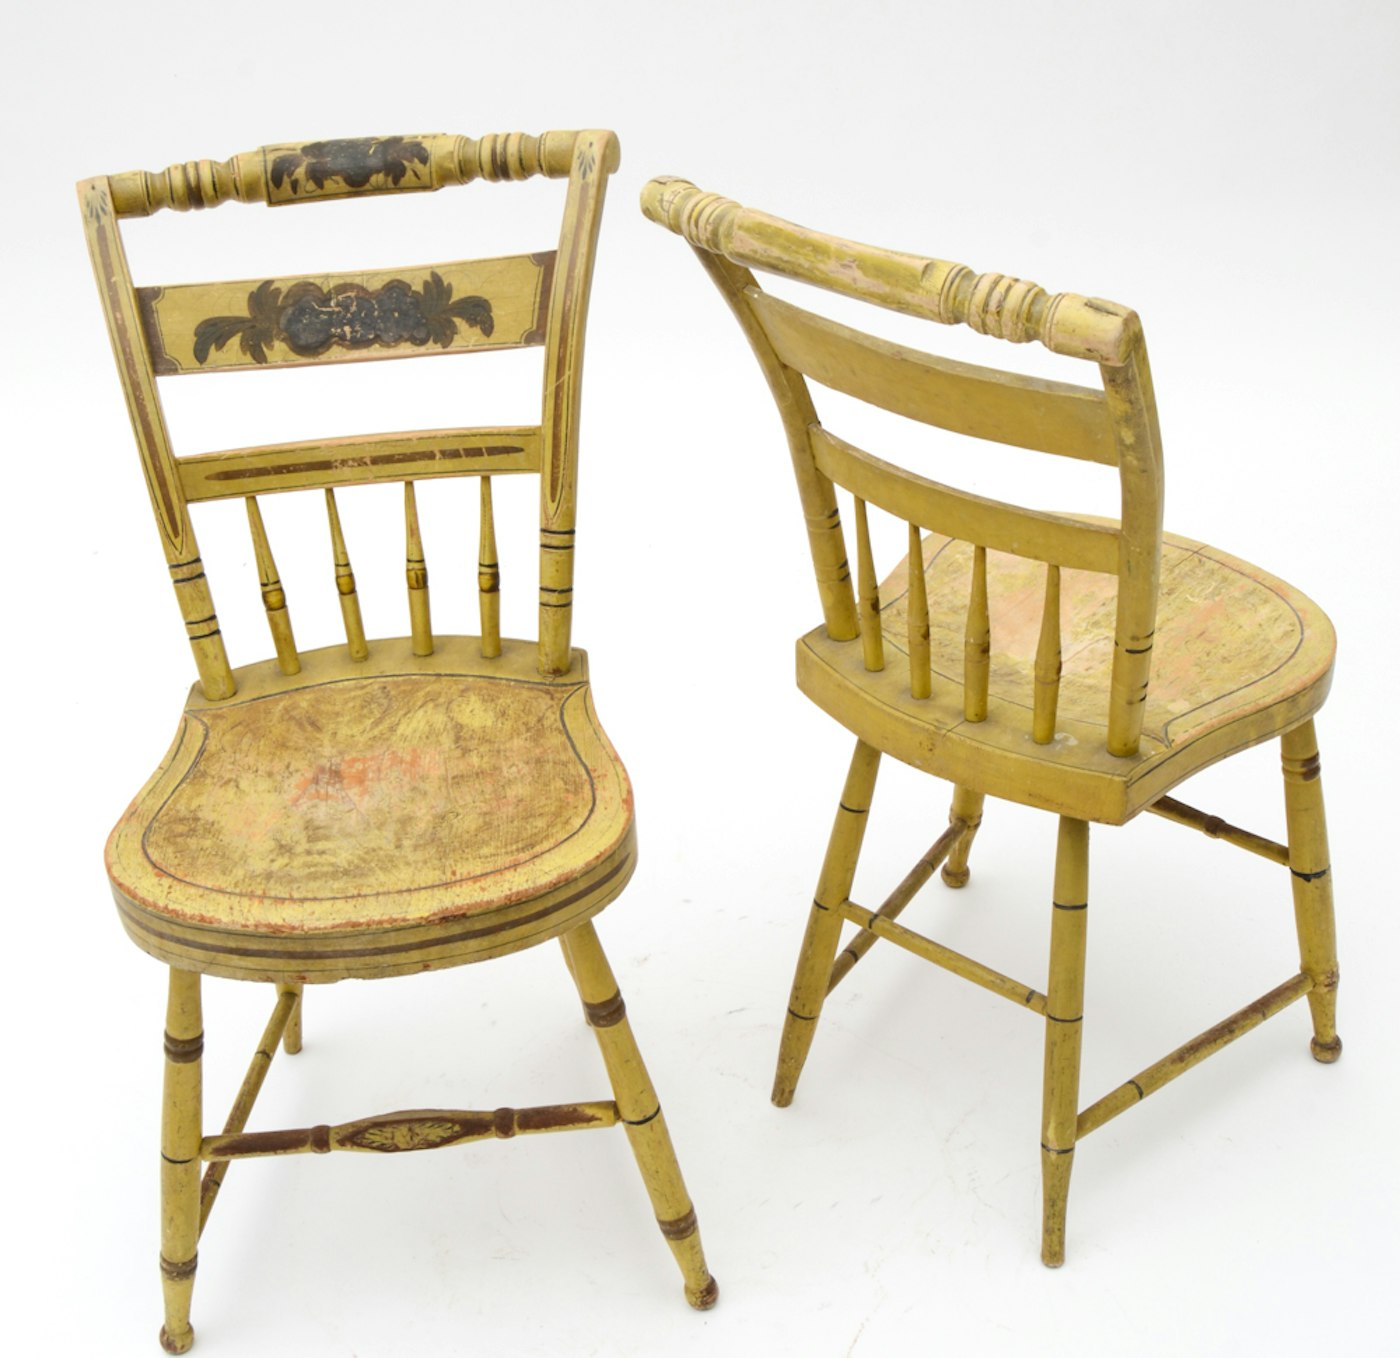 Download Antique Slat-Back Windsor Style Side Chairs by Spring & Haskell | EBTH